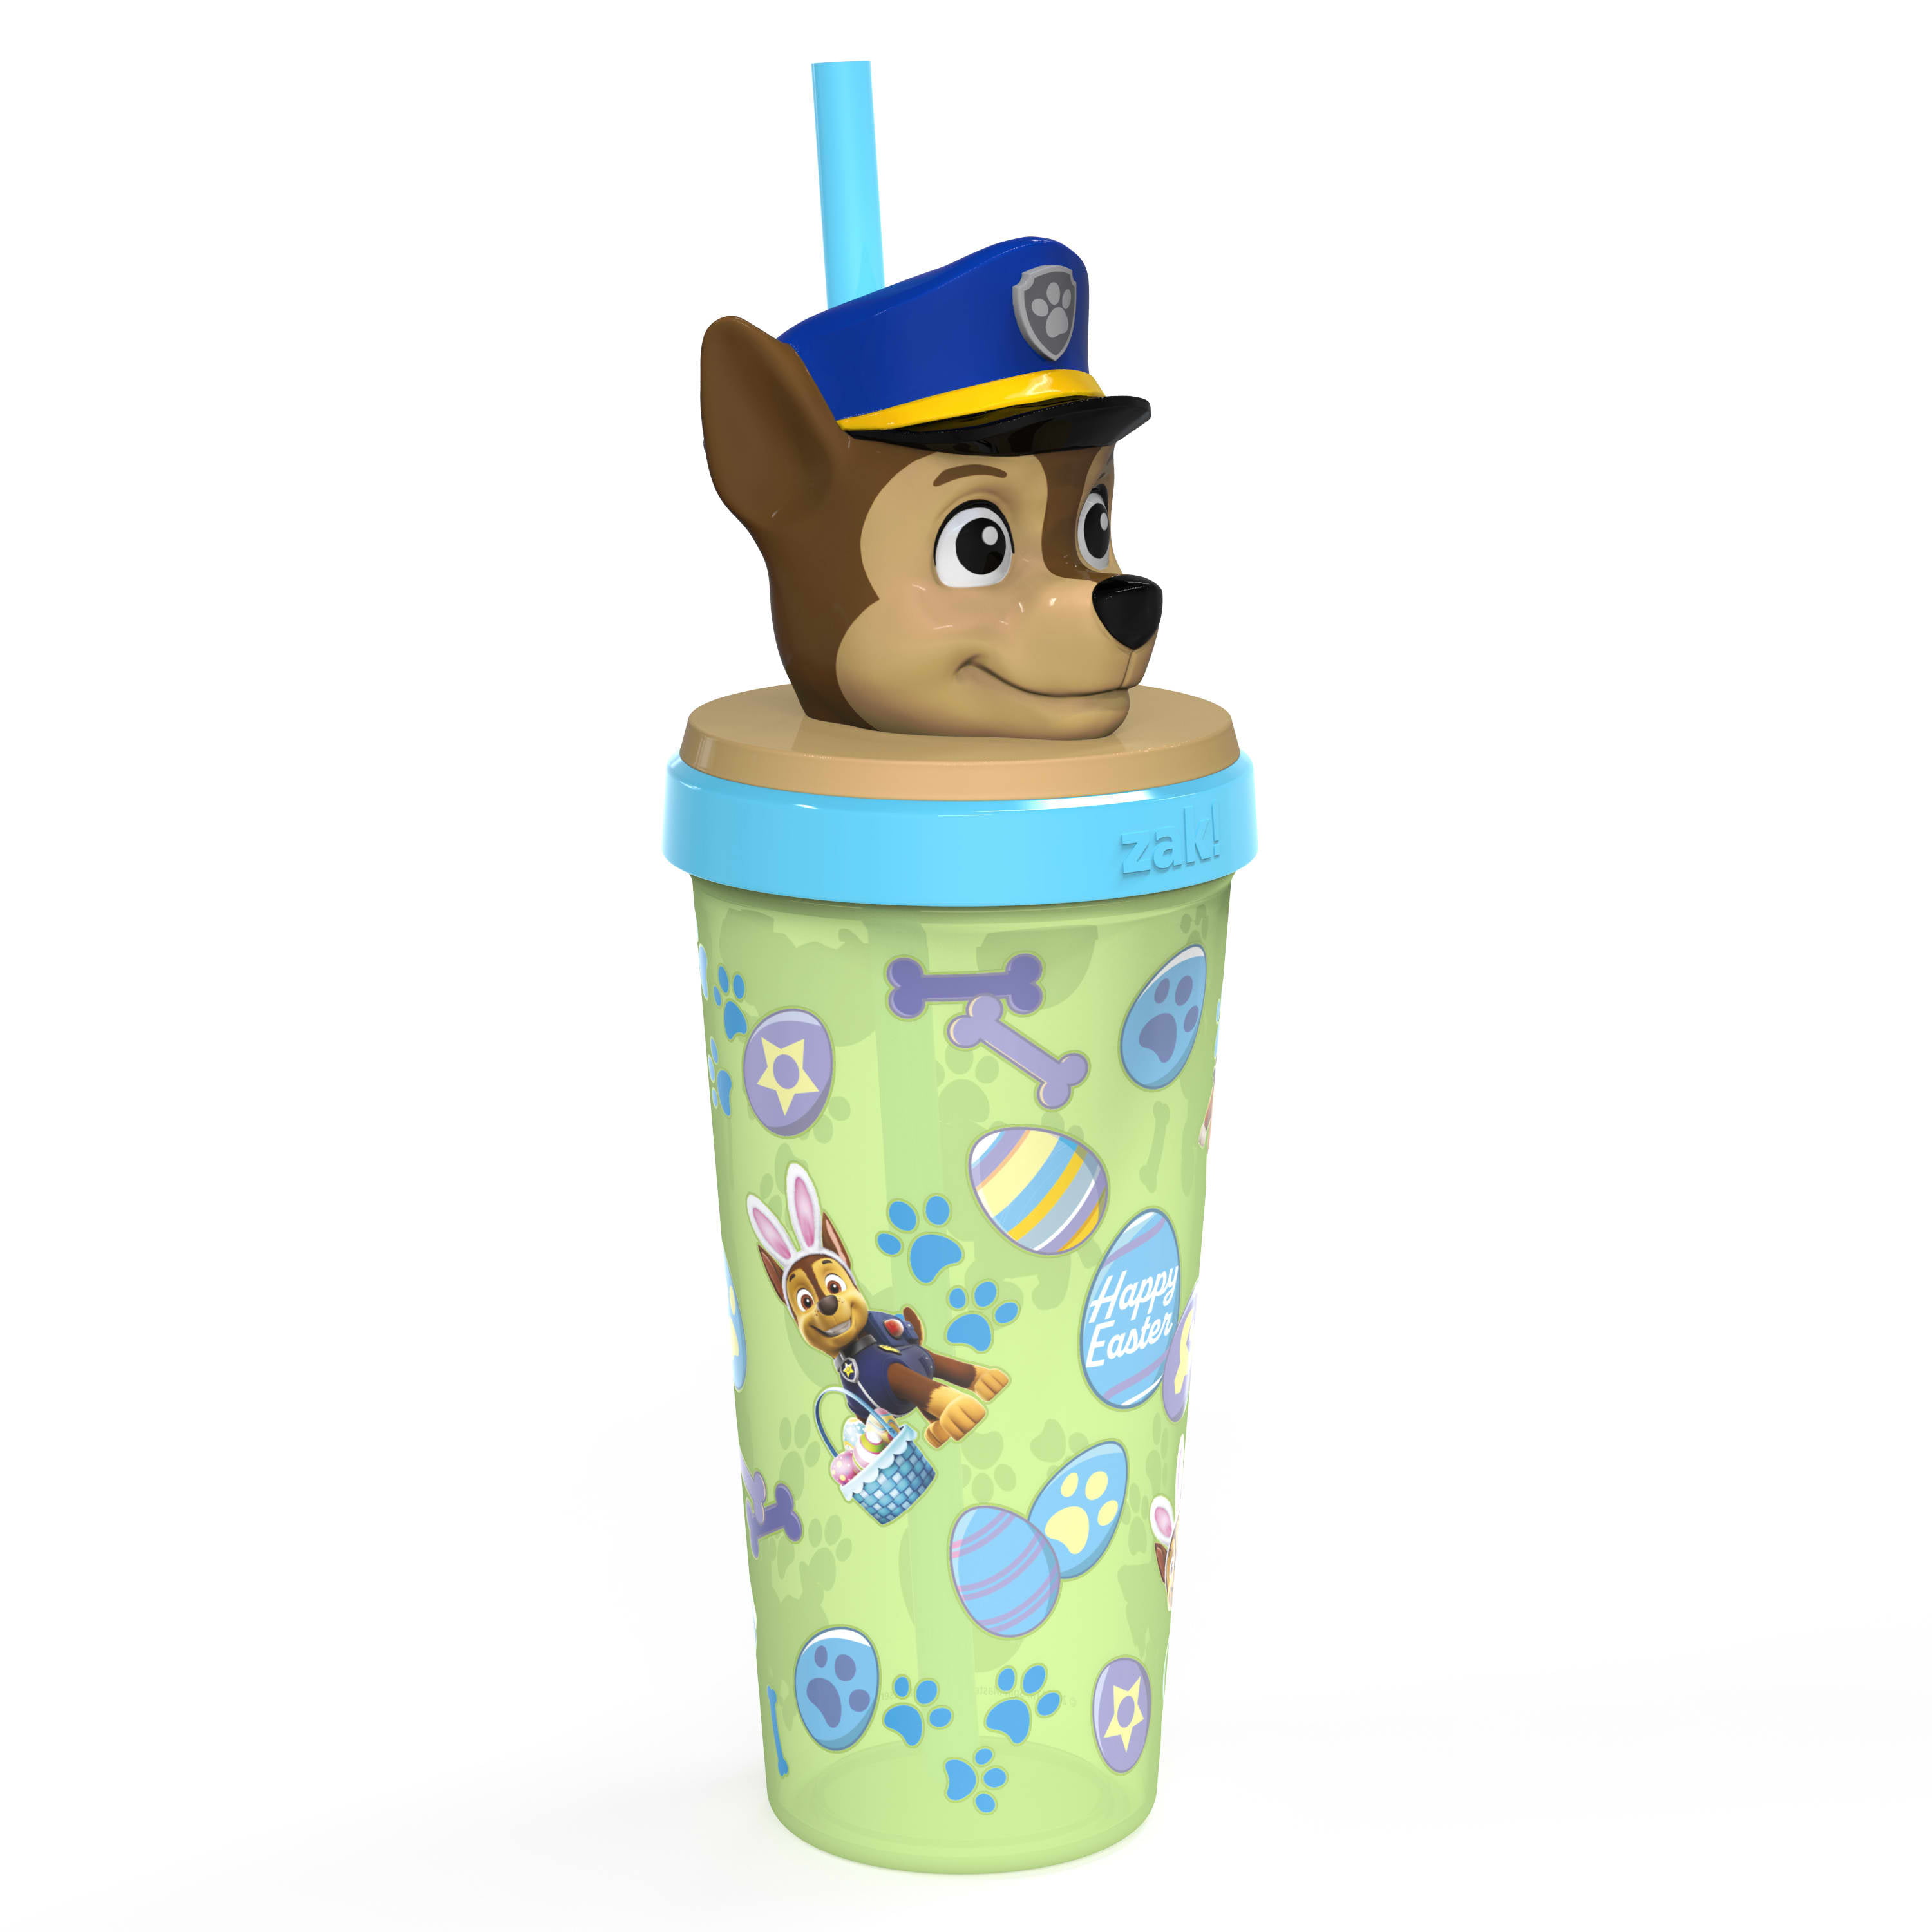 Titans Treasures Gifts on X: Paw Patrol Inspired Custom Personalized  Tumbler, Insulated Tumbler, Custom Tumbler Cup, You Choose the Characters  you want!!  #TitansTreasuresGifts # #KidCup   / X